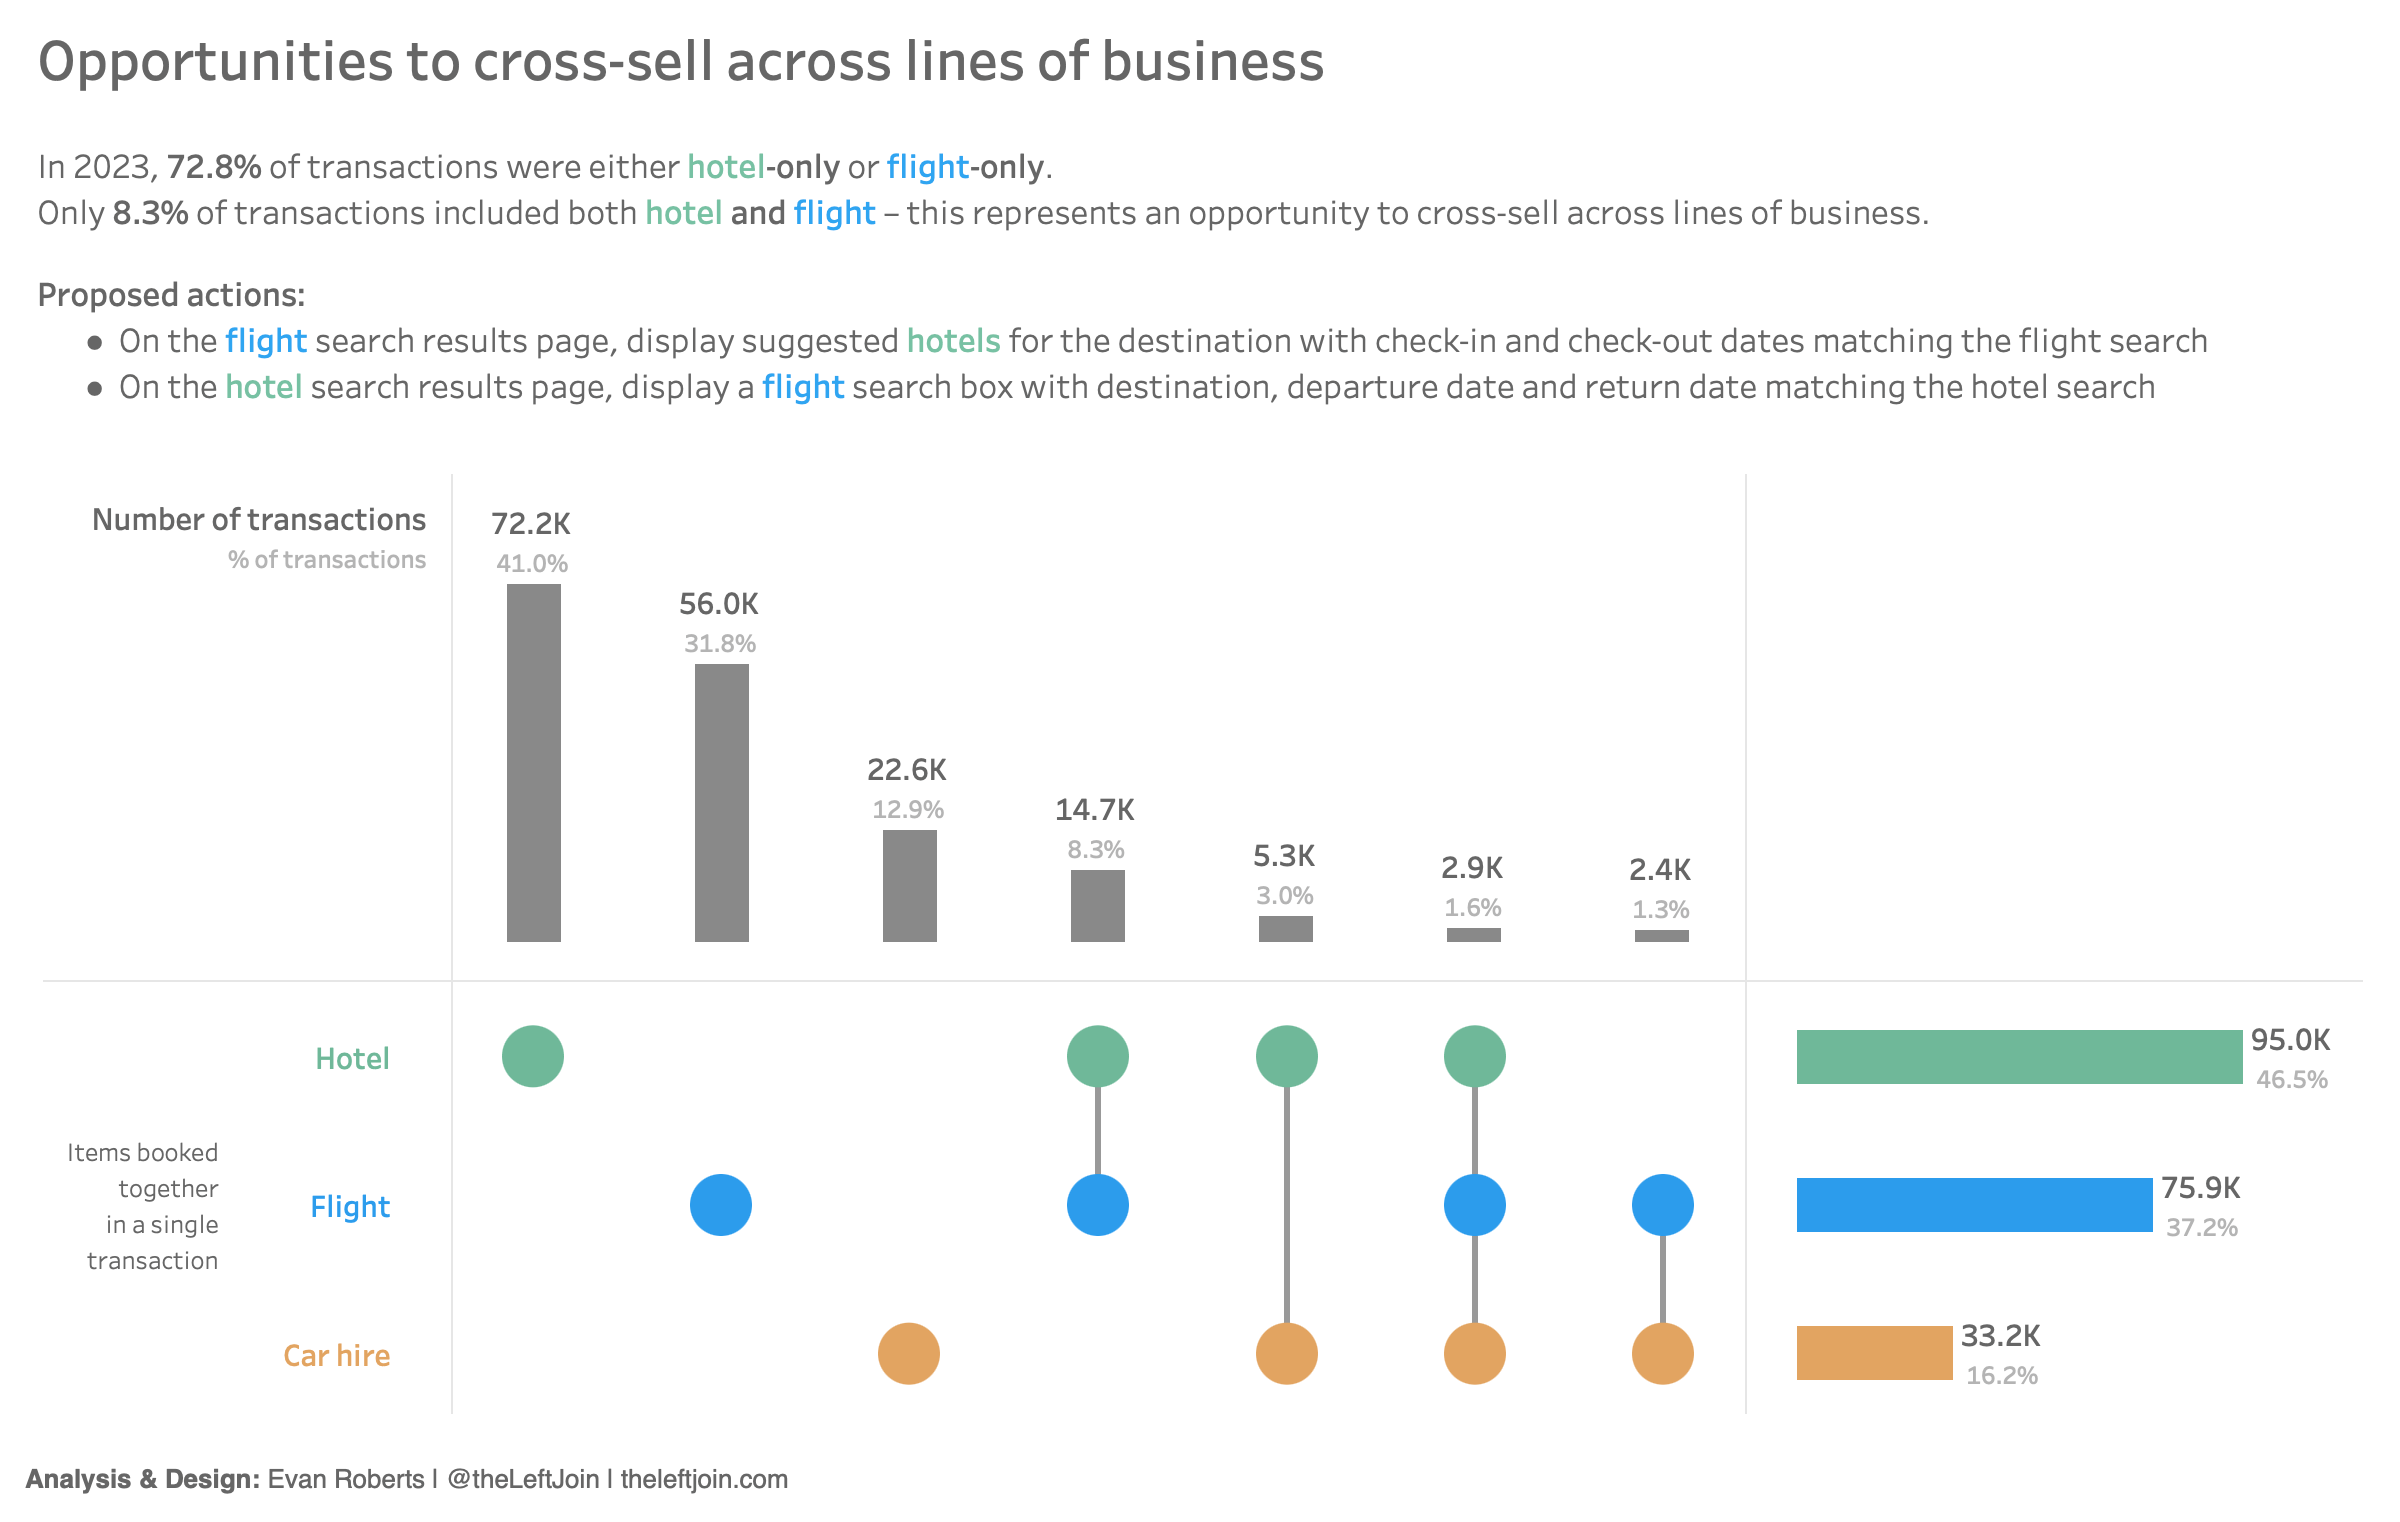 Opportunities to cross-sell across lines of business displayed in an UpSet chart